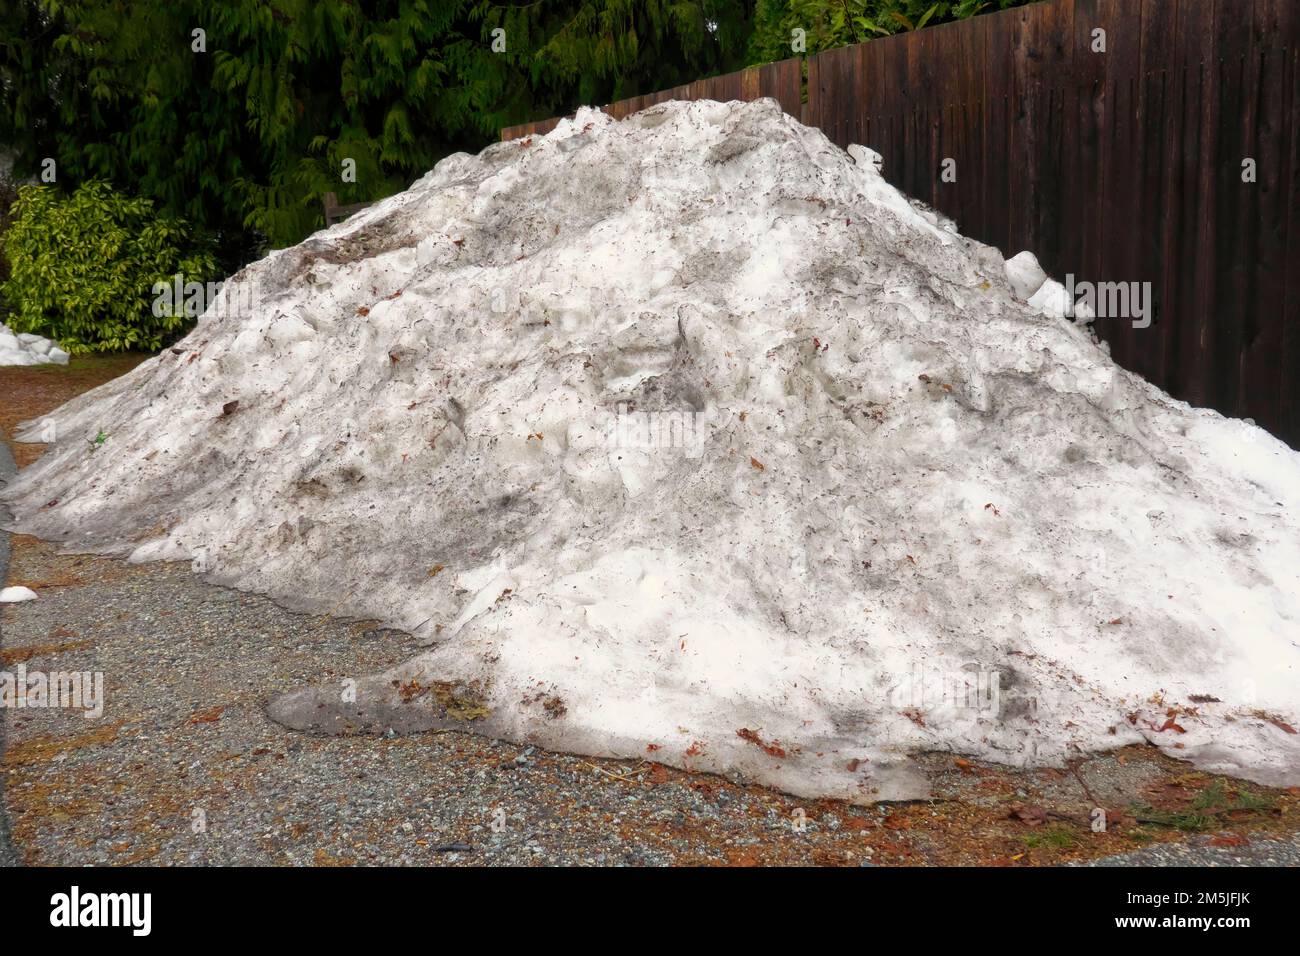 Dirty snow piled up against a fence. Stock Photo